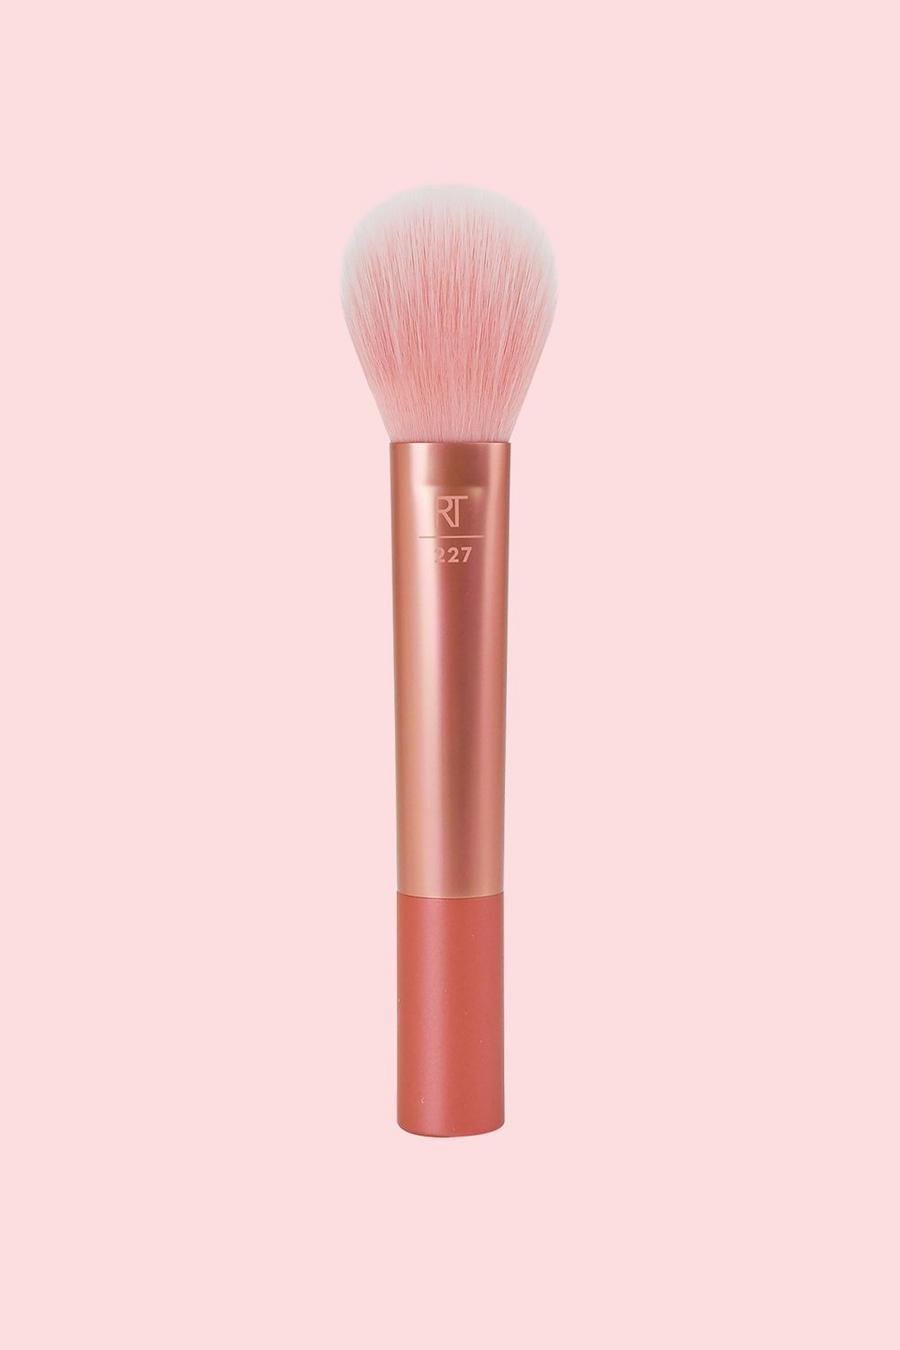 Pink REAL TECHNIQUES LIGHT LAYER POWDER MAKEUP BRUSH